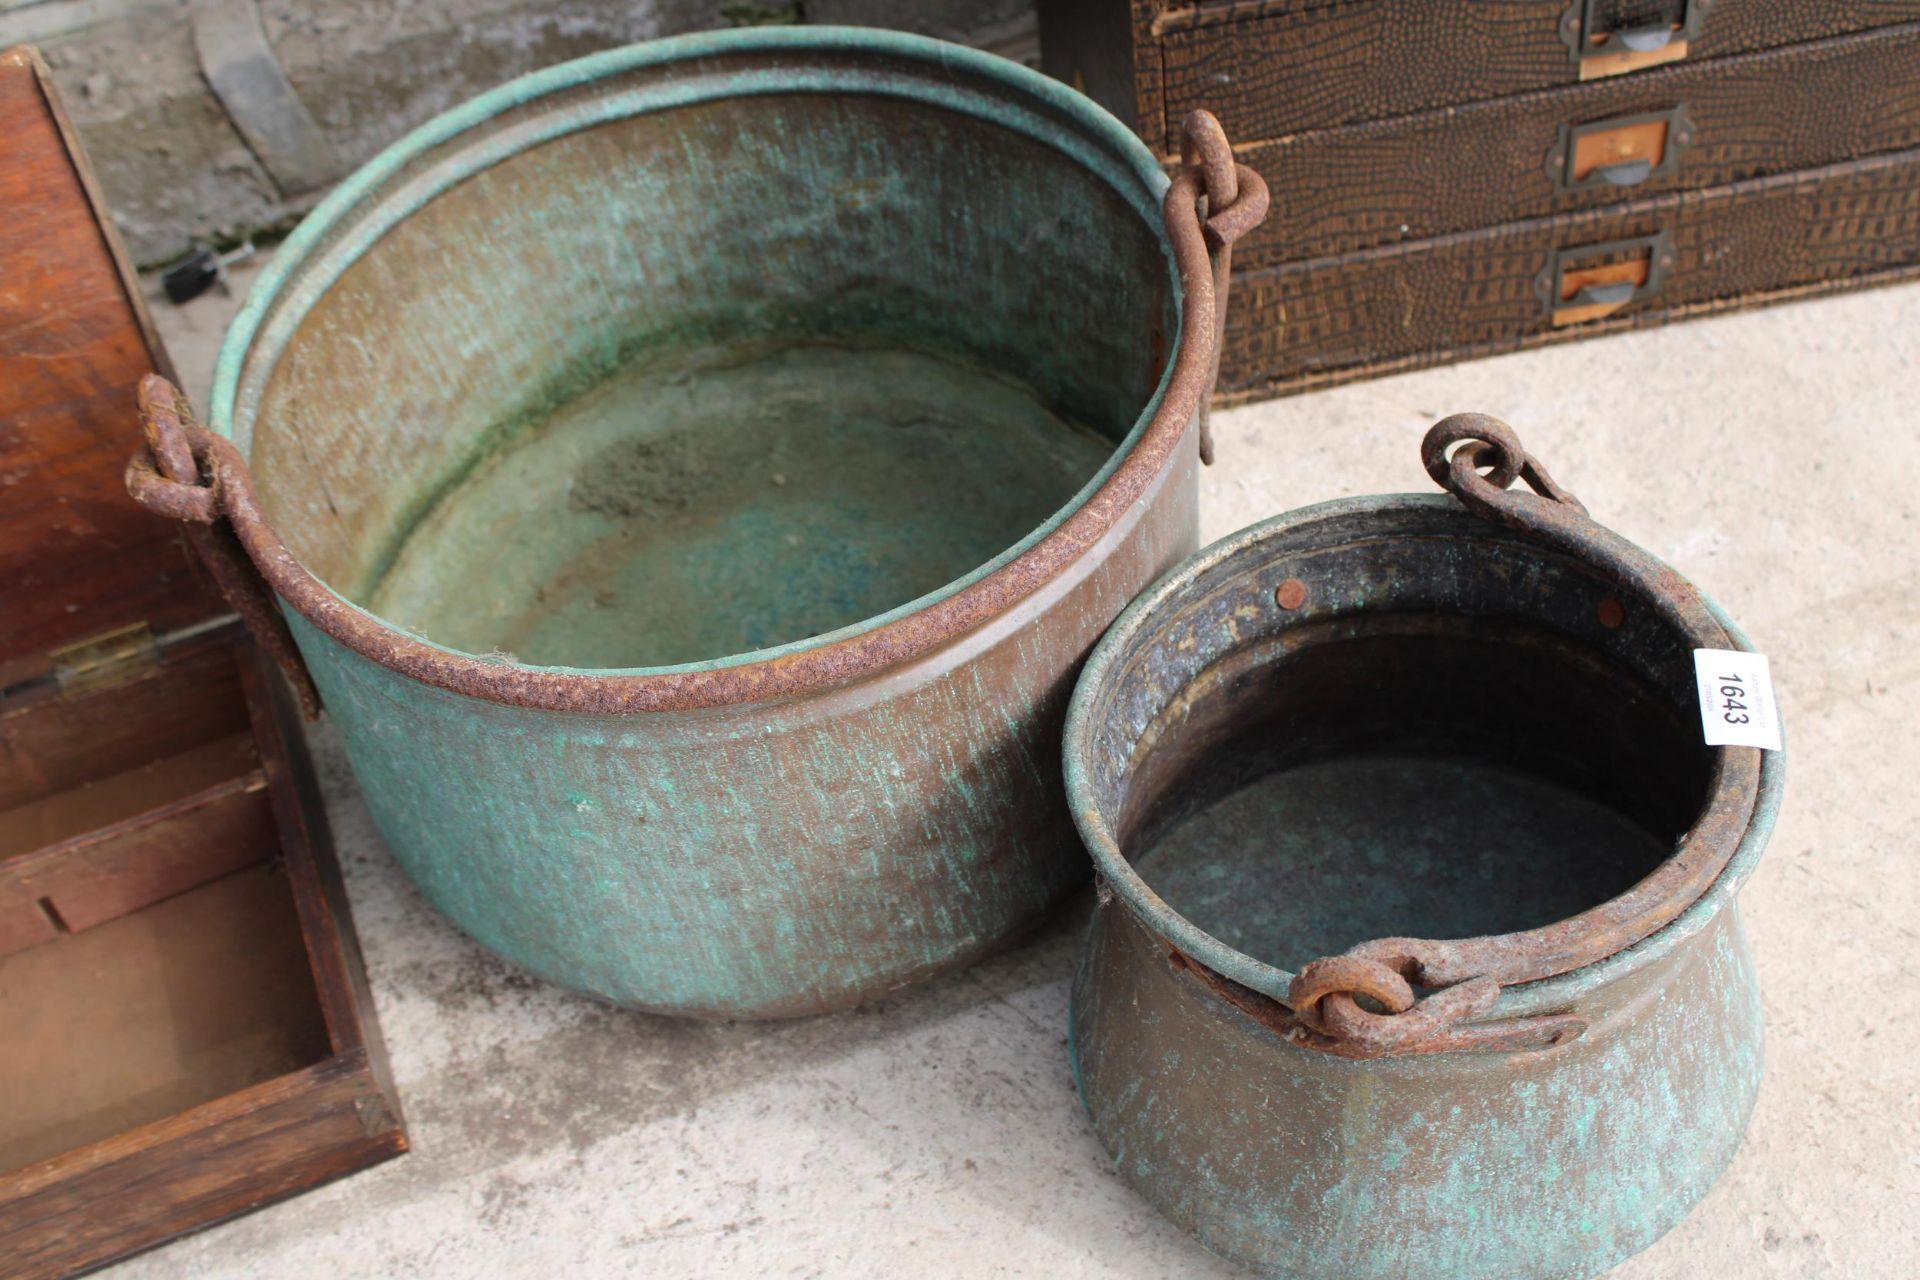 TWO VINTAGE COPPER COOKING POTS WITH STEEL HANDLES - Image 2 of 2